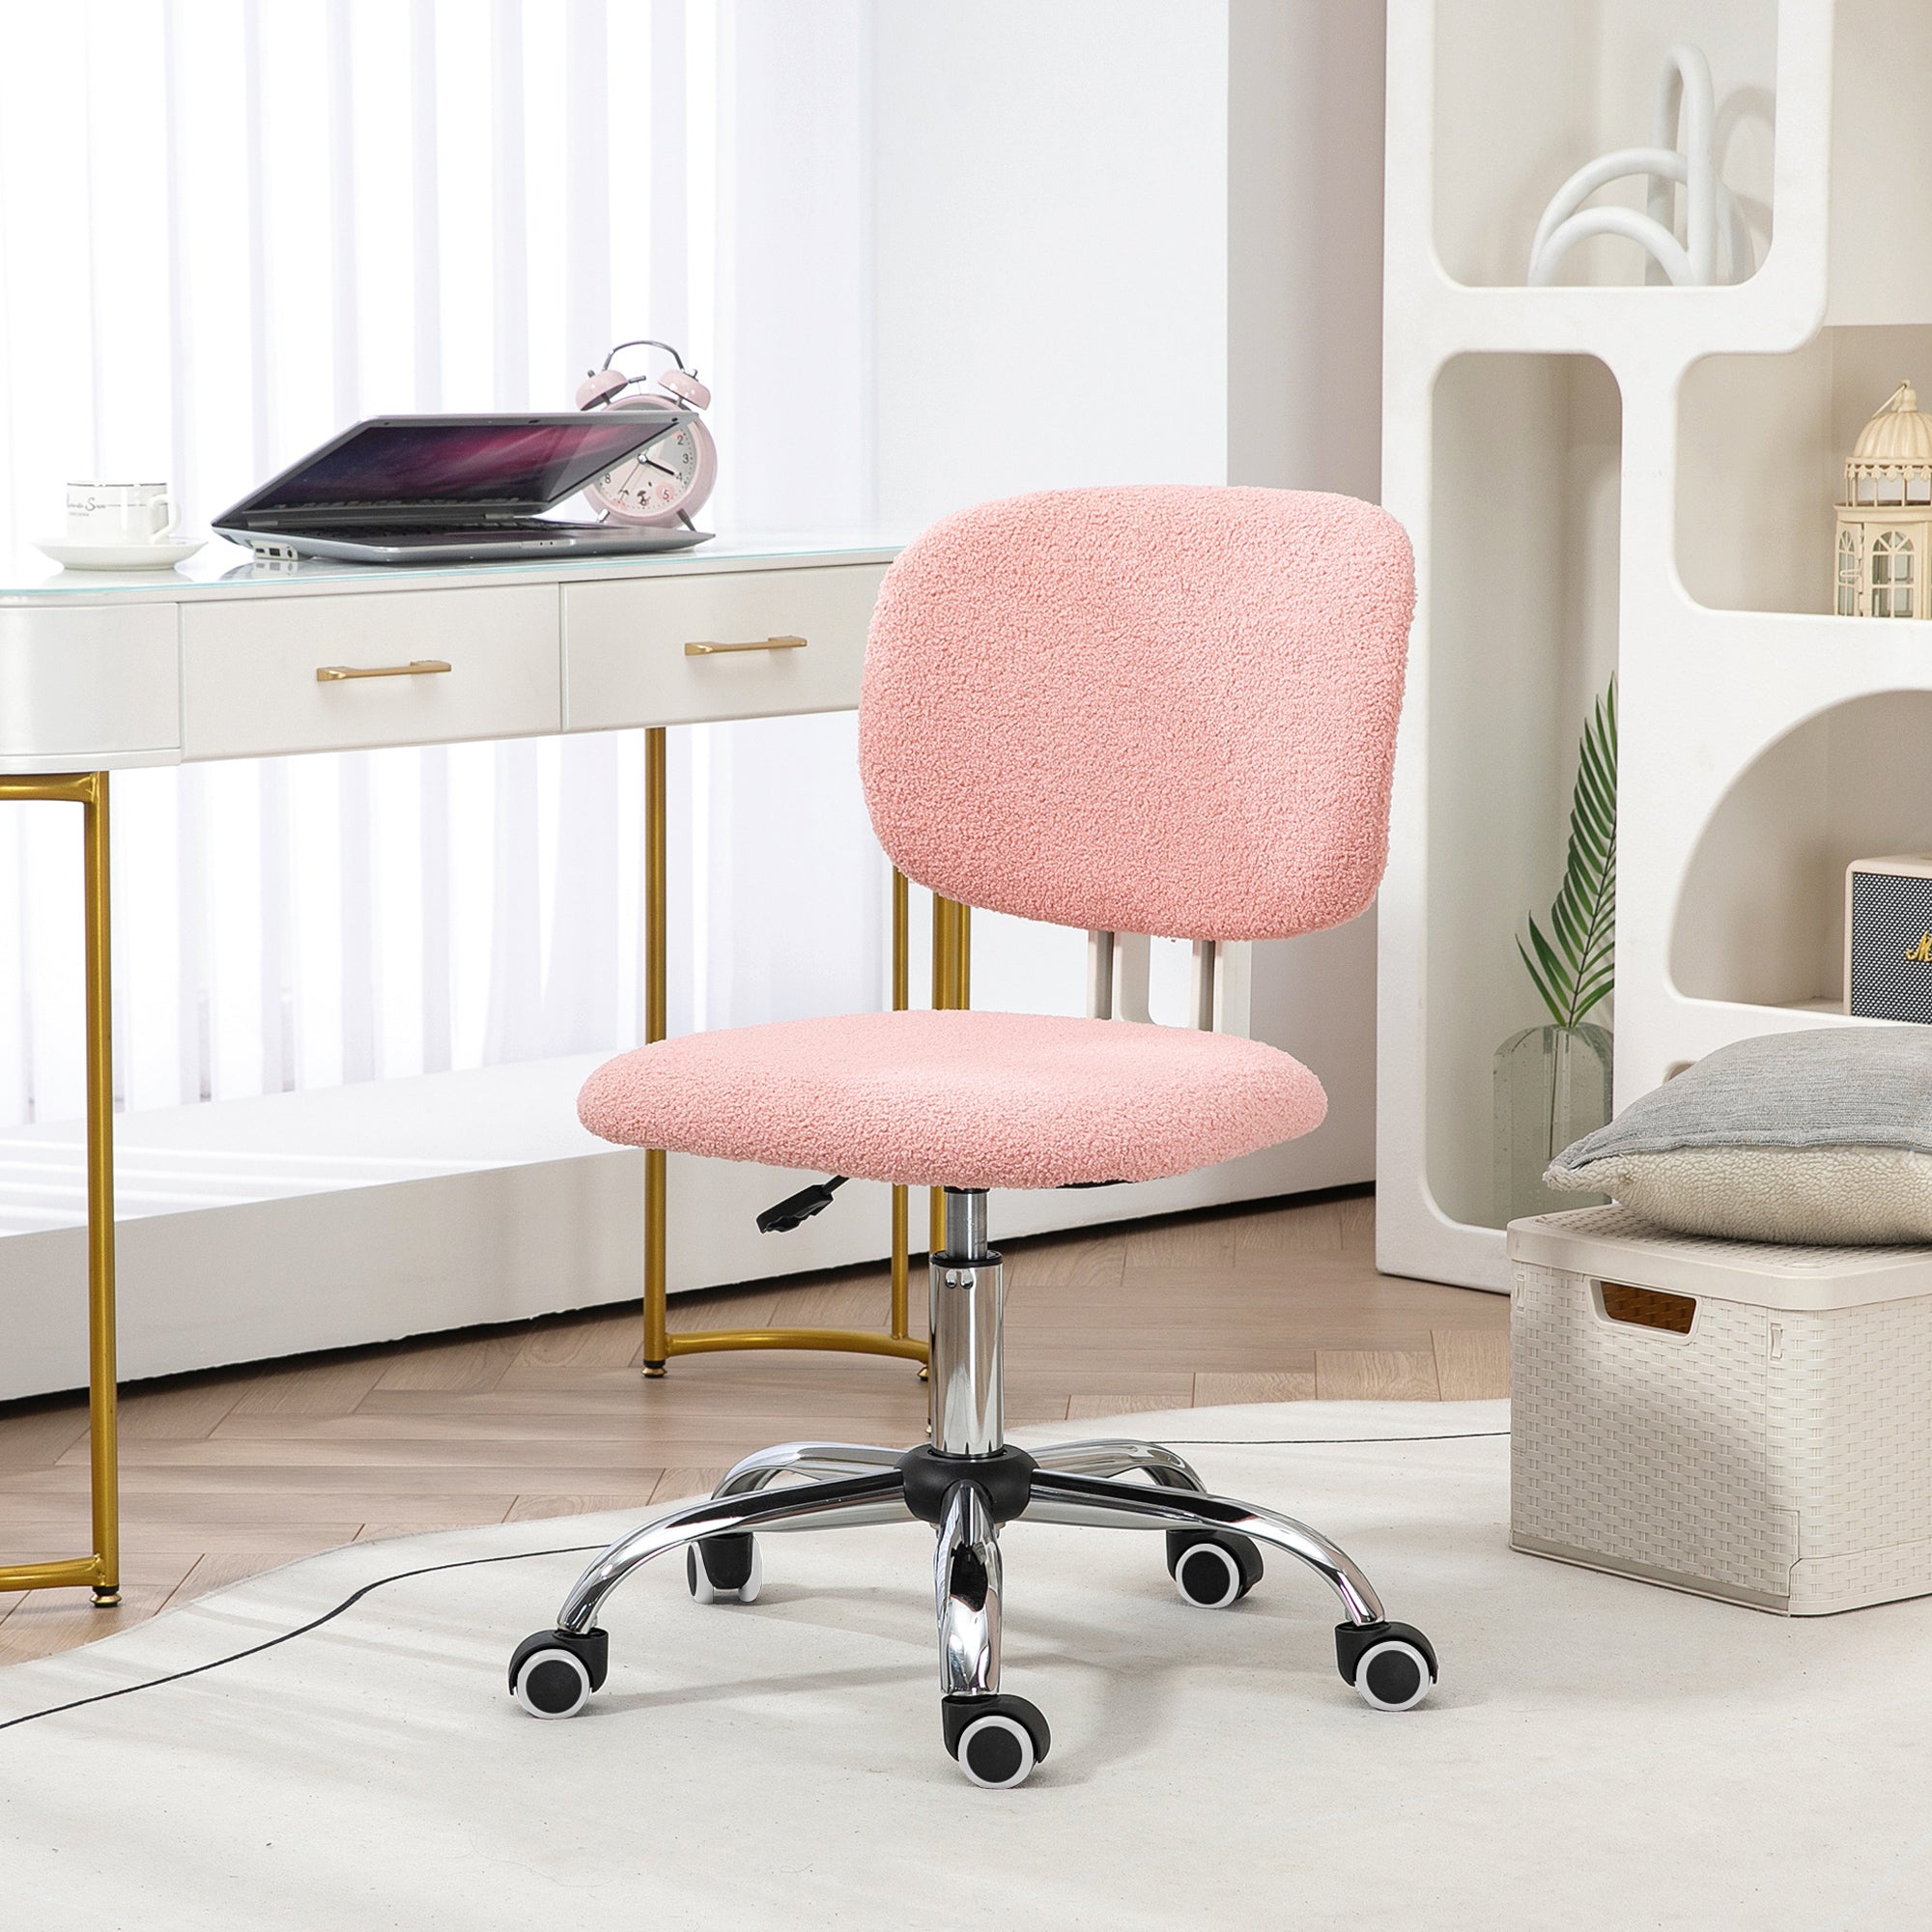 Cute Armless Office Chair, Teddy Fleece Fabric Computer Desk Chair, Vanity Task Chair with Adjustable Height, Swivel Wheels, Mid Back - Pink